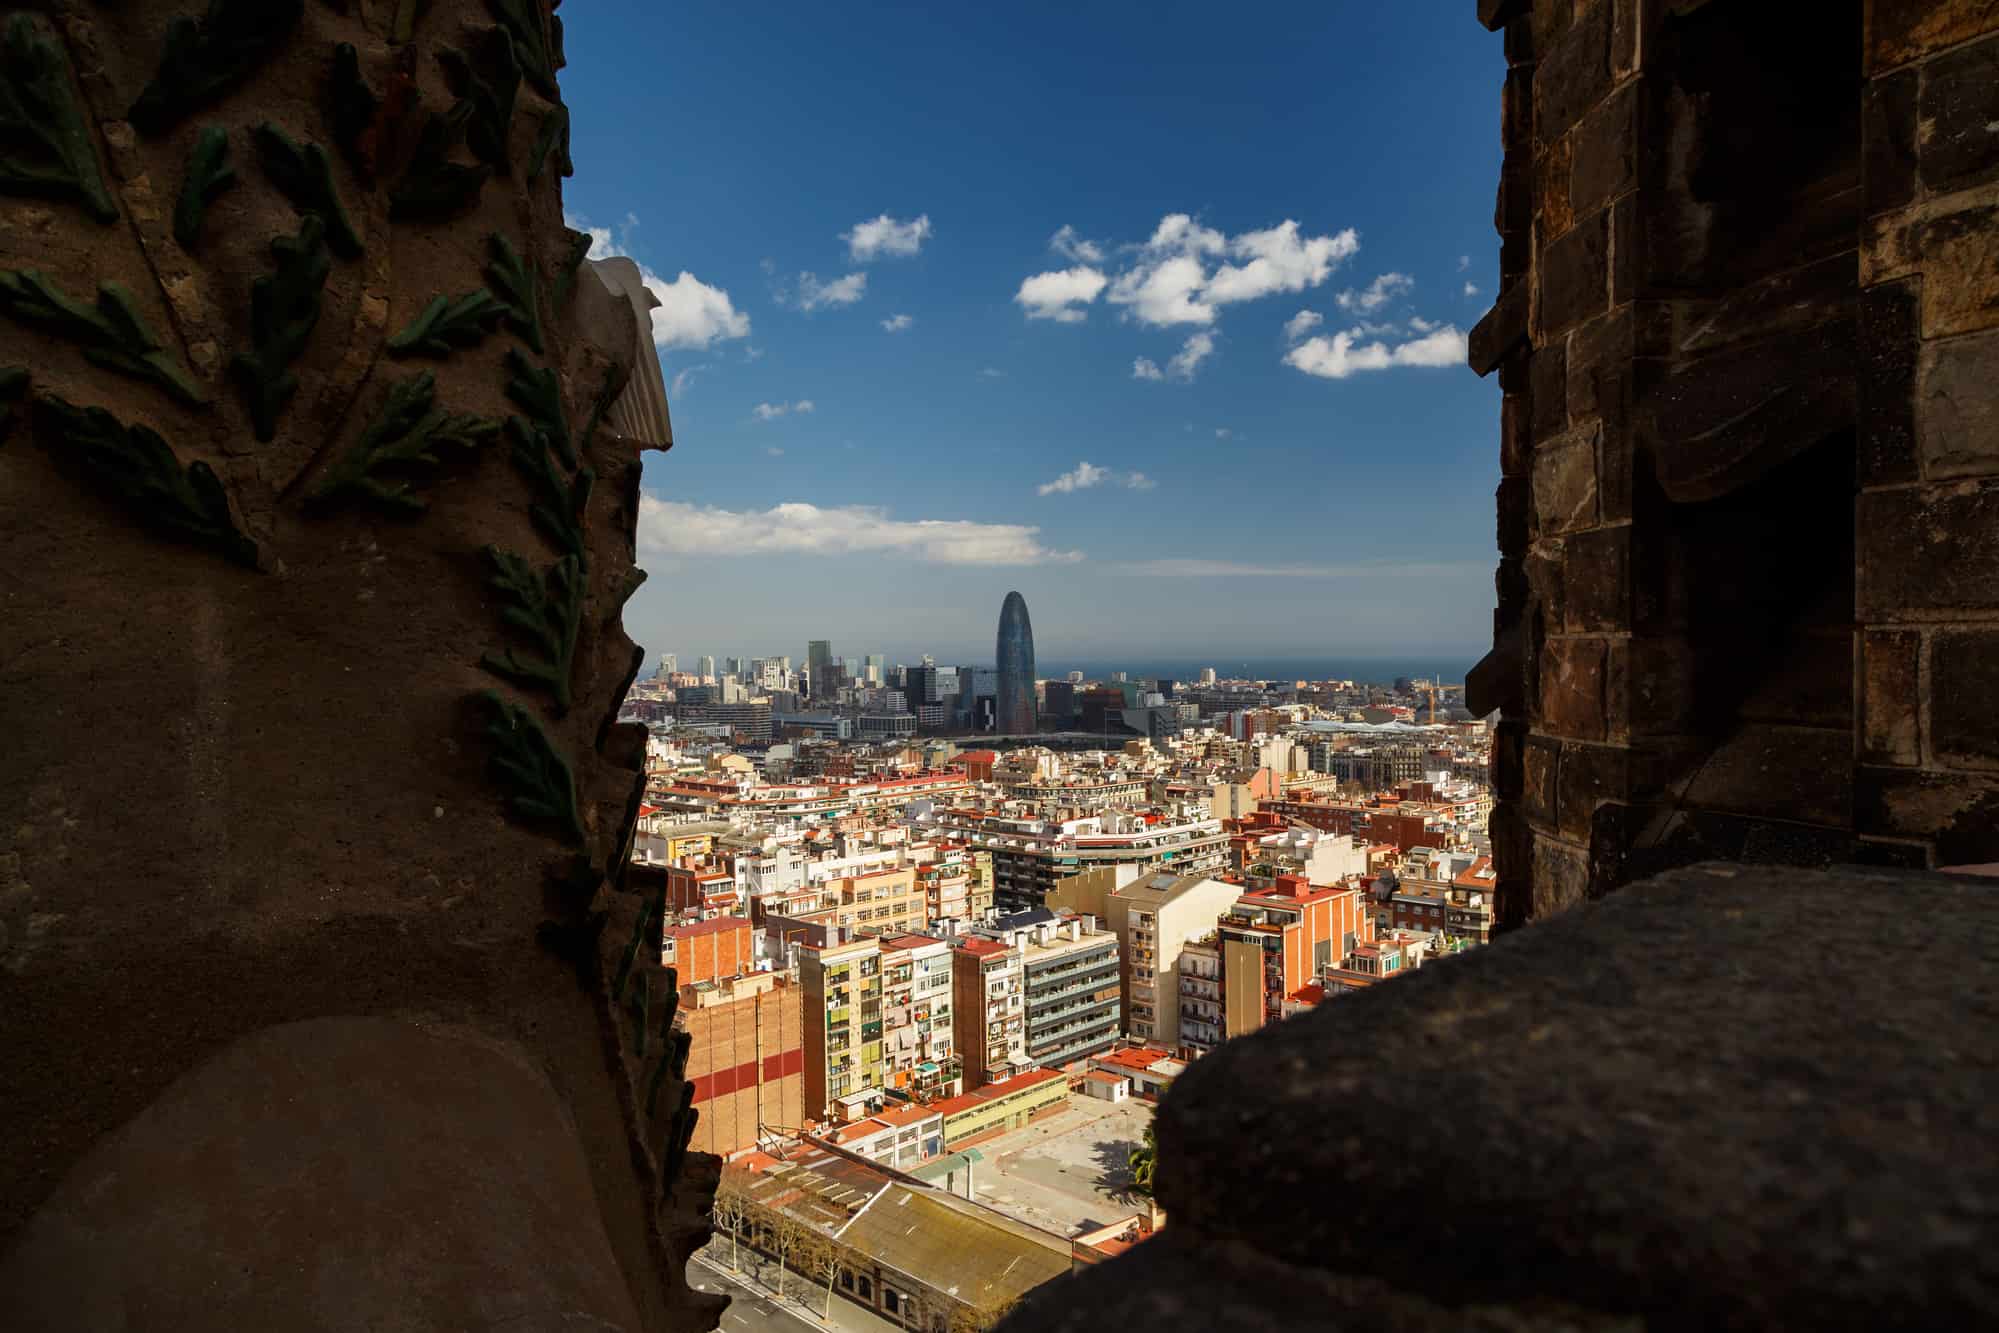 Barcelona downtown and uptown